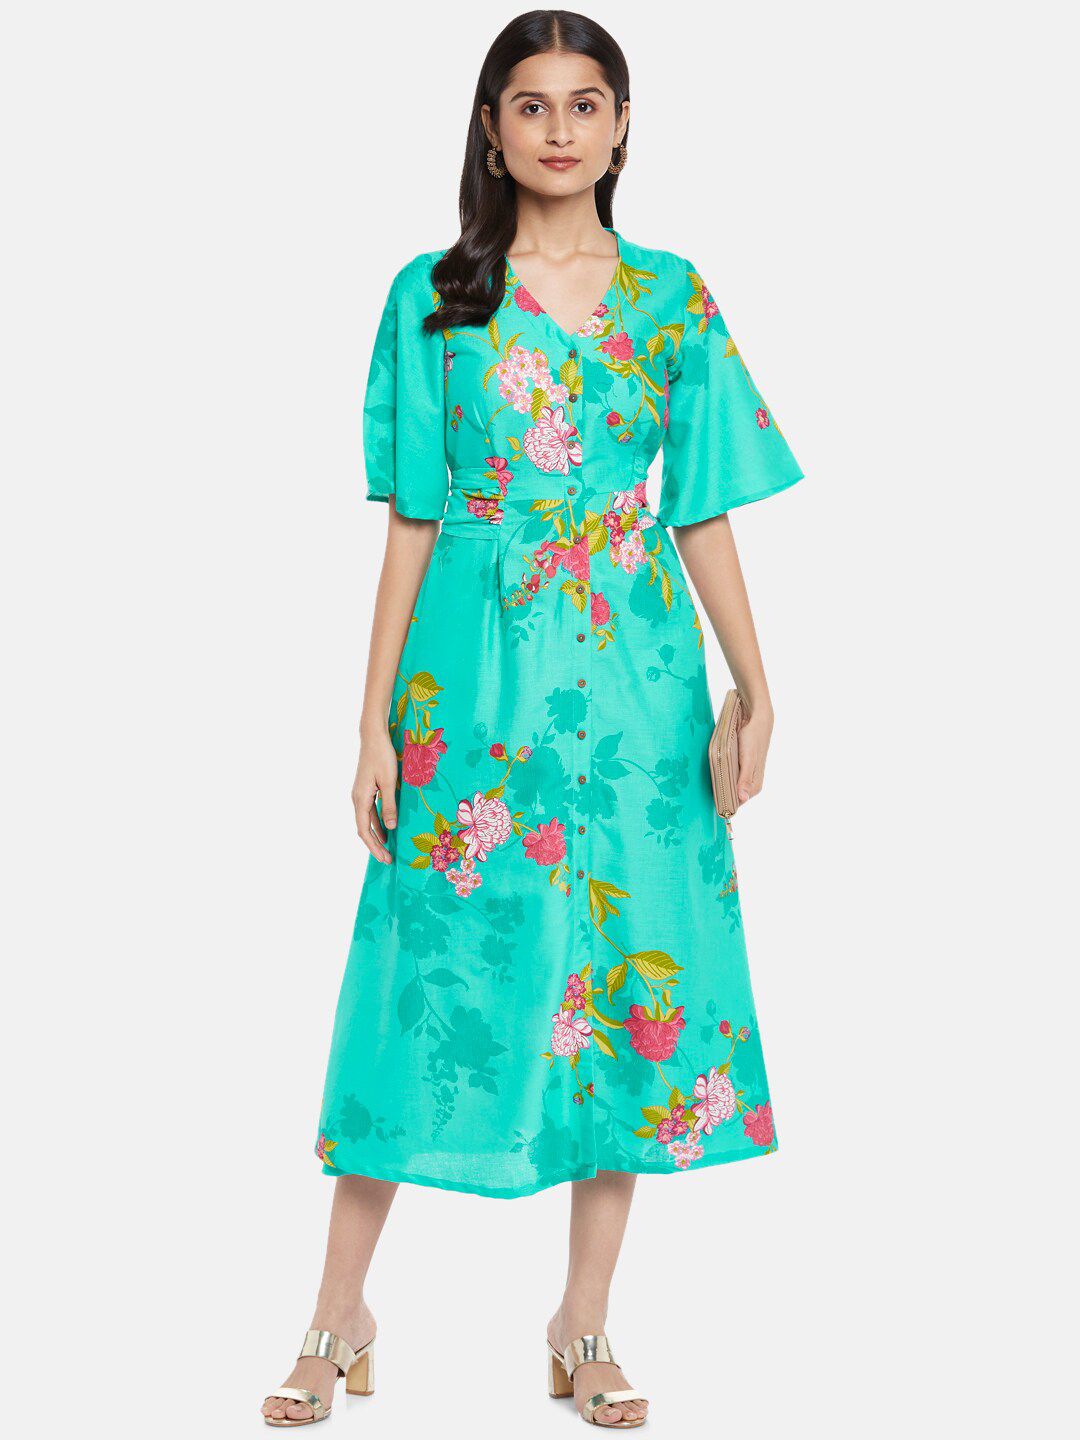 AKKRITI BY PANTALOONS Turquoise Blue Floral A-Line Midi Dress Price in India